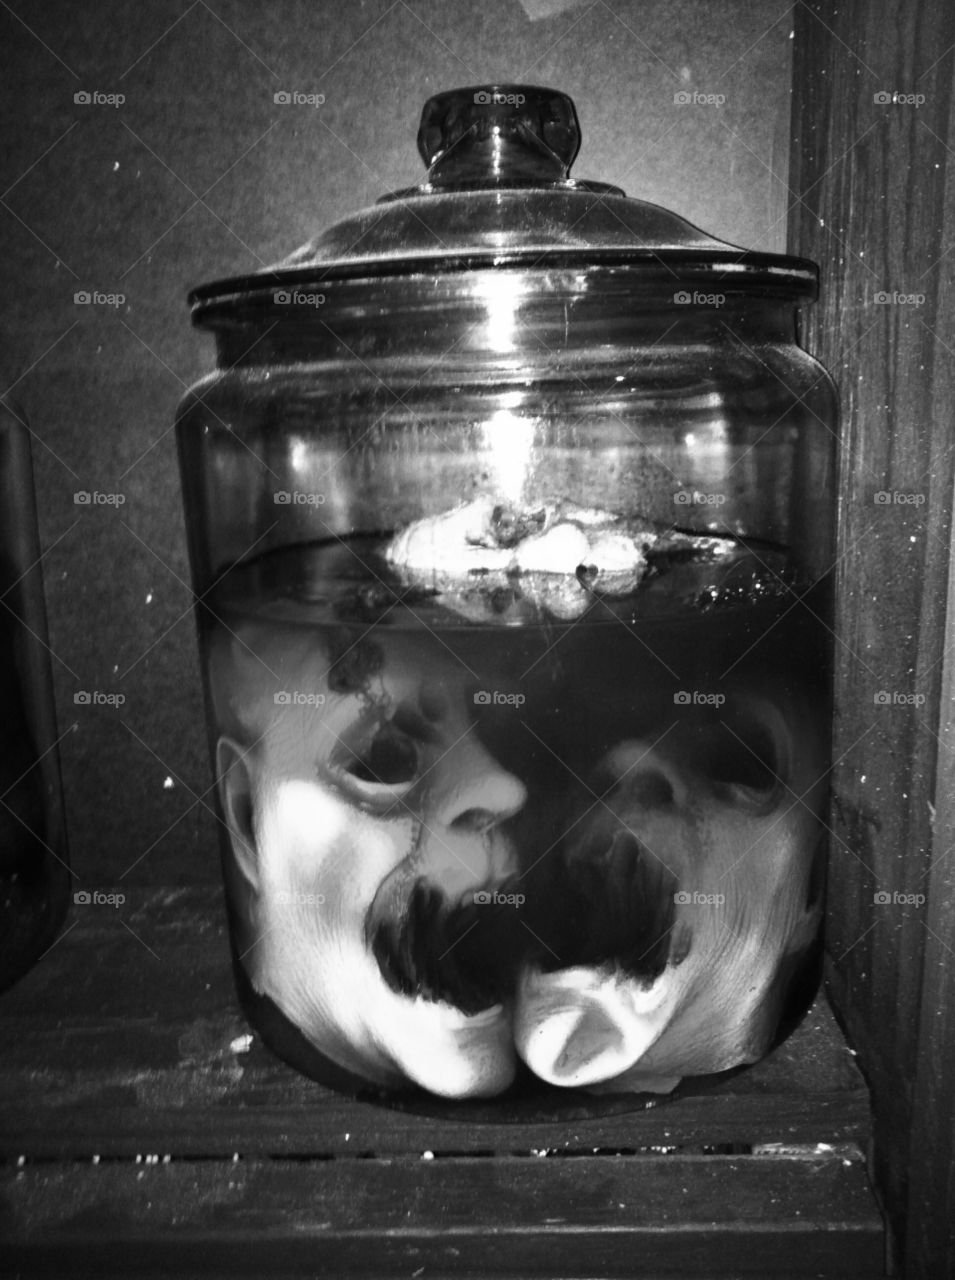 Two screaming heads in a jar!